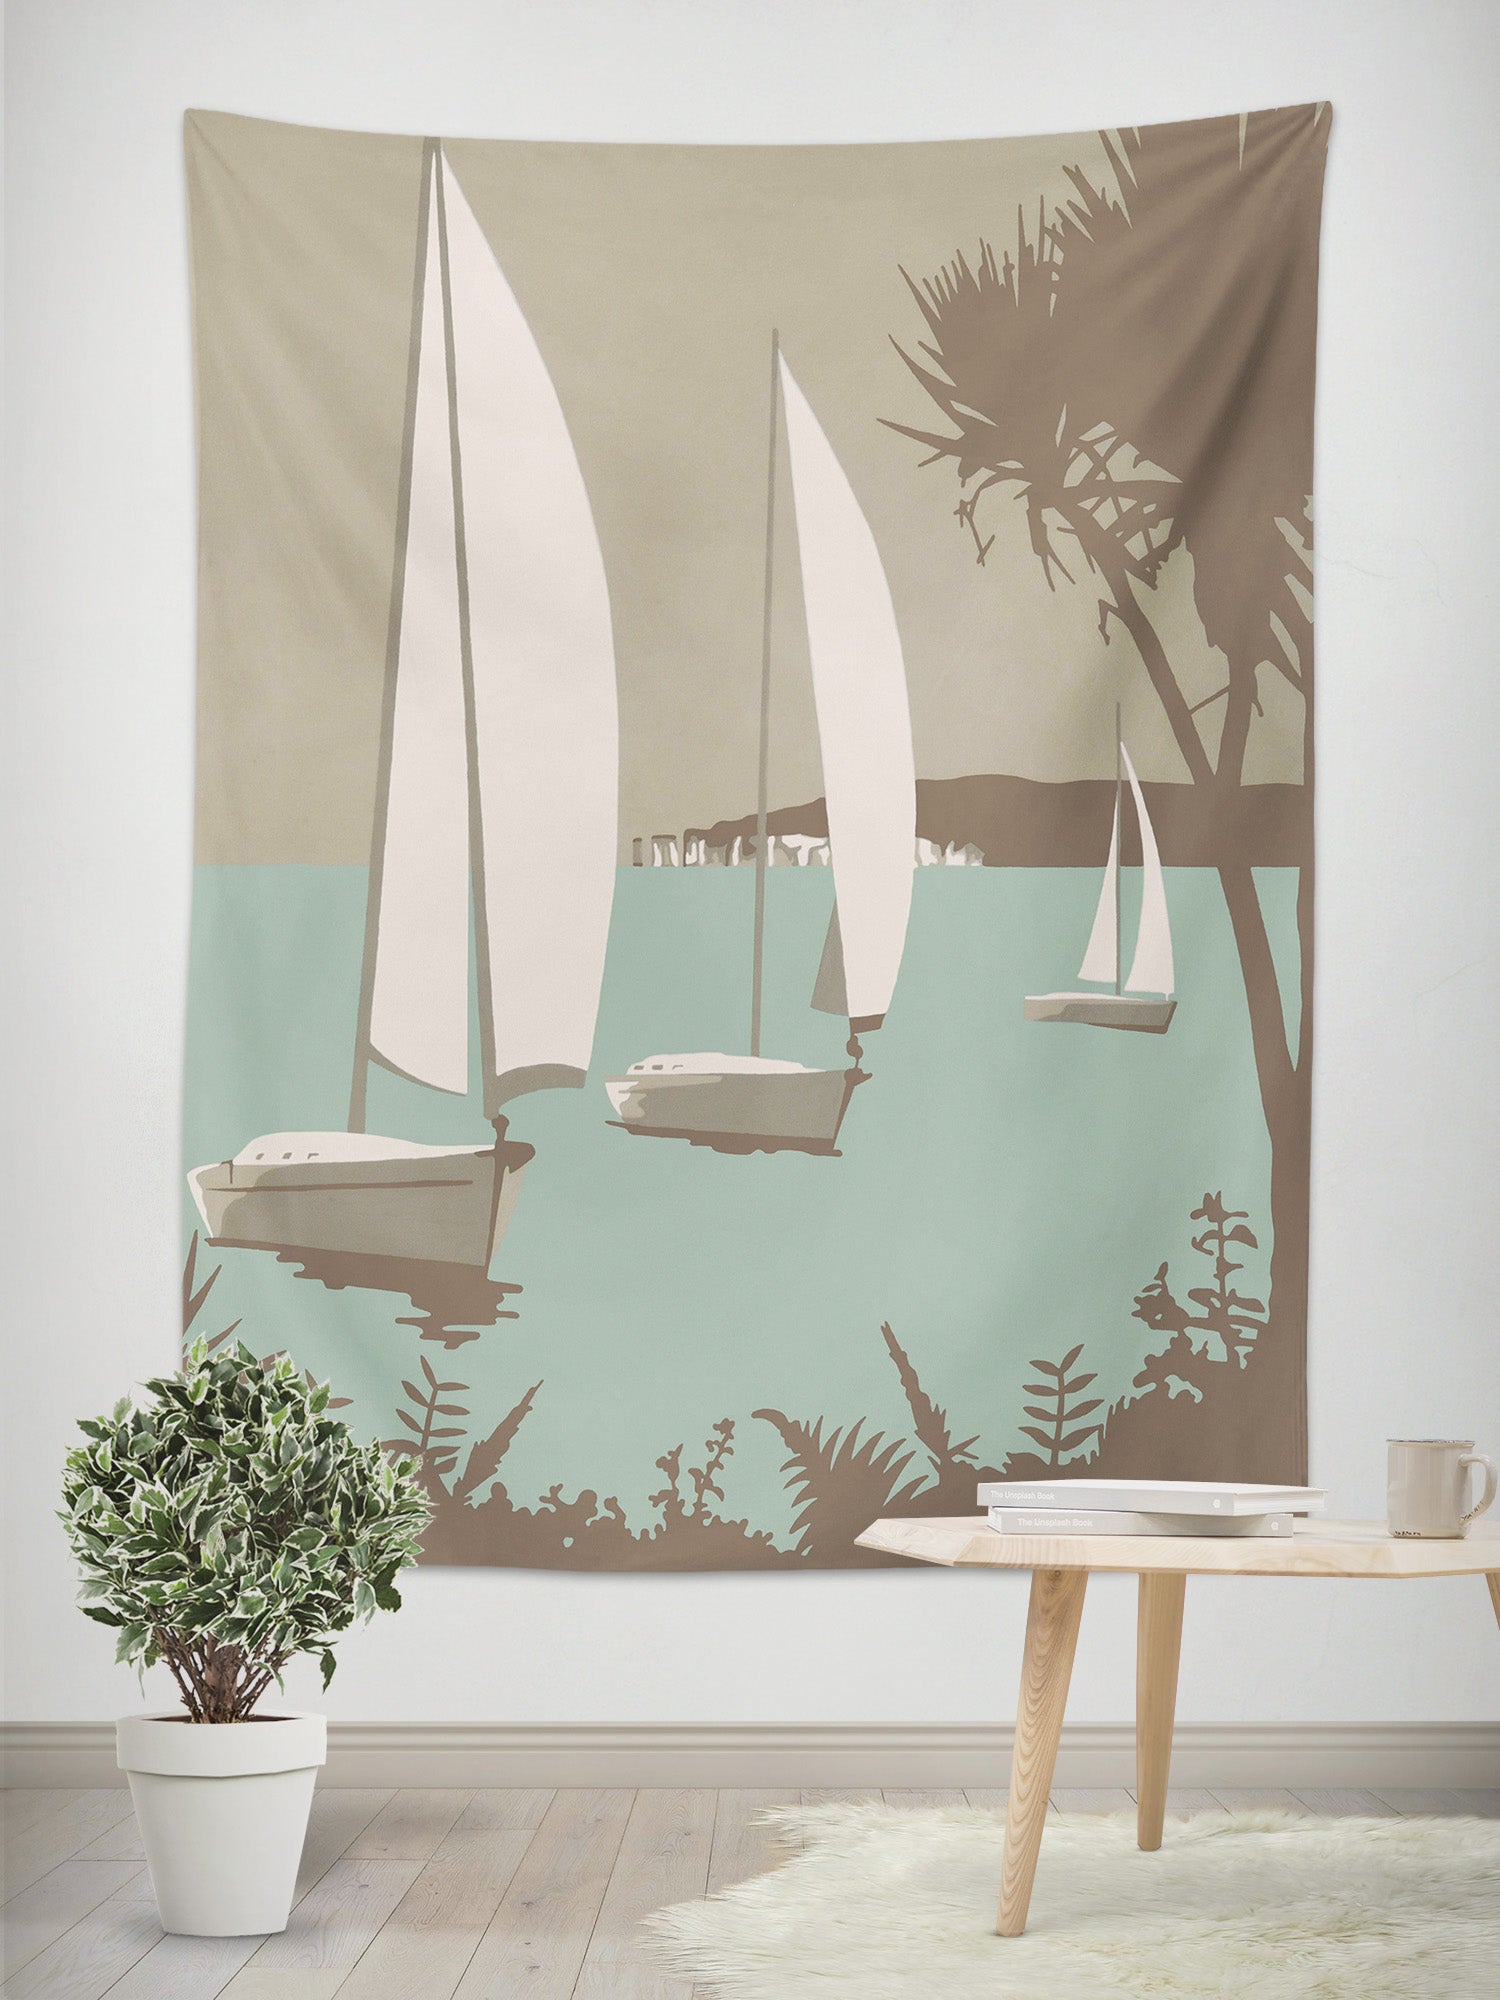 3D White Sailboat 5362 Steve Read Tapestry Hanging Cloth Hang